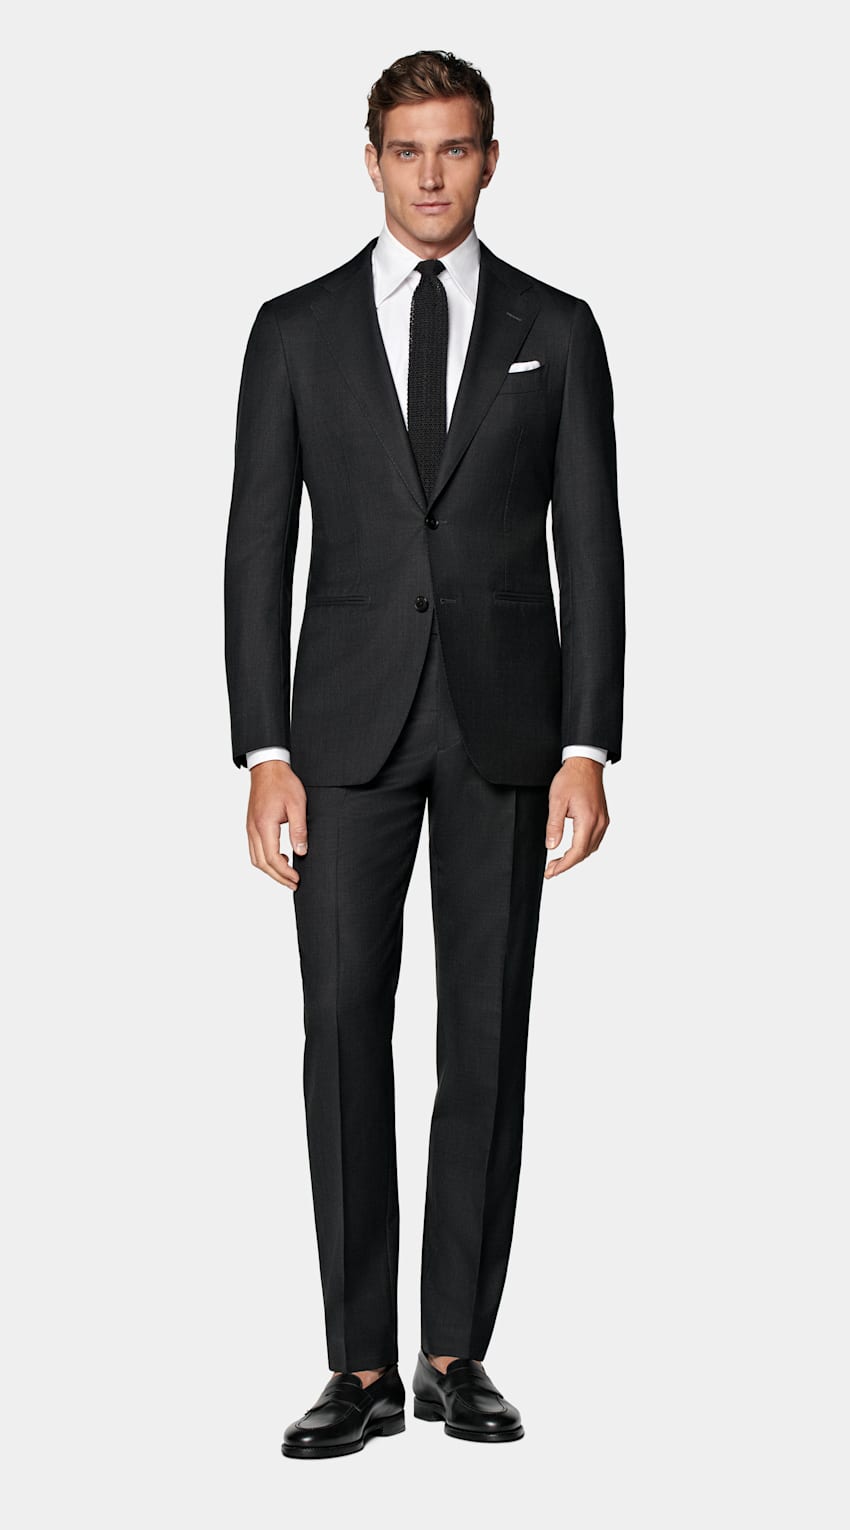 SUITSUPPLY Pure S150's Wool by Vitale Barberis Canonico, Italy Dark Grey Tailored Fit Havana Suit